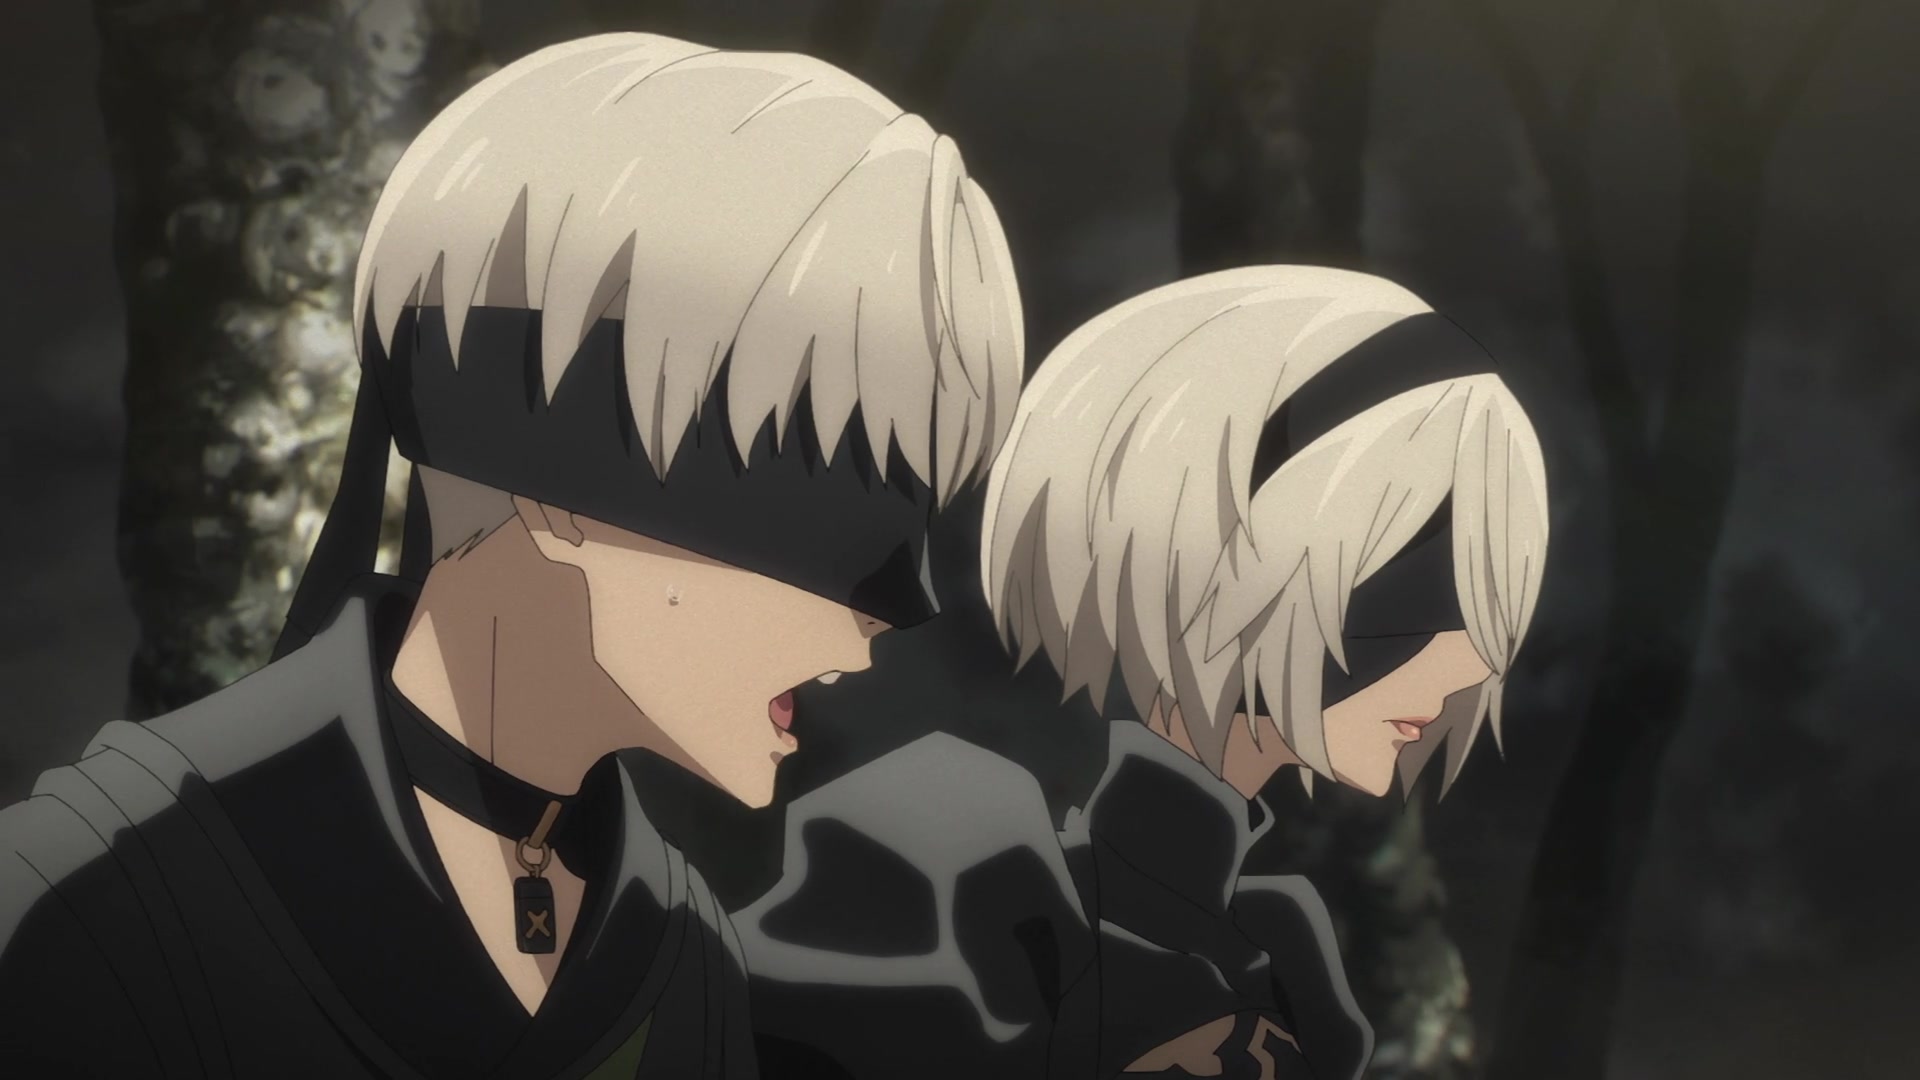 Animemes Nation  NEWS NieR Automata anime adaptation has been officially  announced Studio A1Pictures Watch the teaser here  httpstwittercomNieRAANIMEstatus1496442772244819979thoIg3WrtHcHI4PDPEoY3aQs19   Facebook